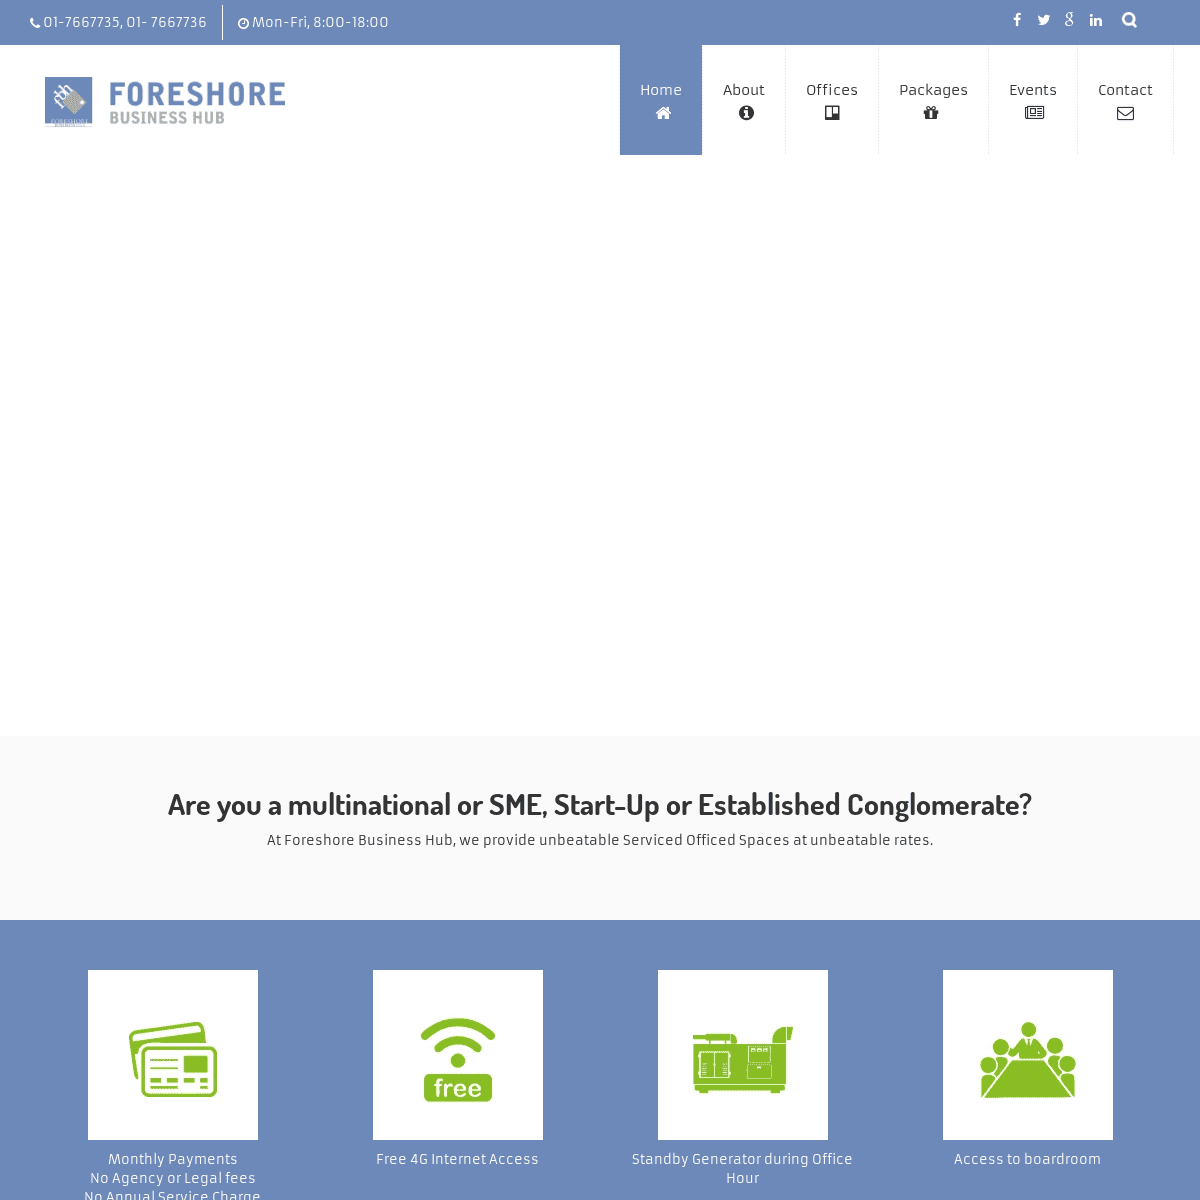 A complete backup of https://foreshorehub.com